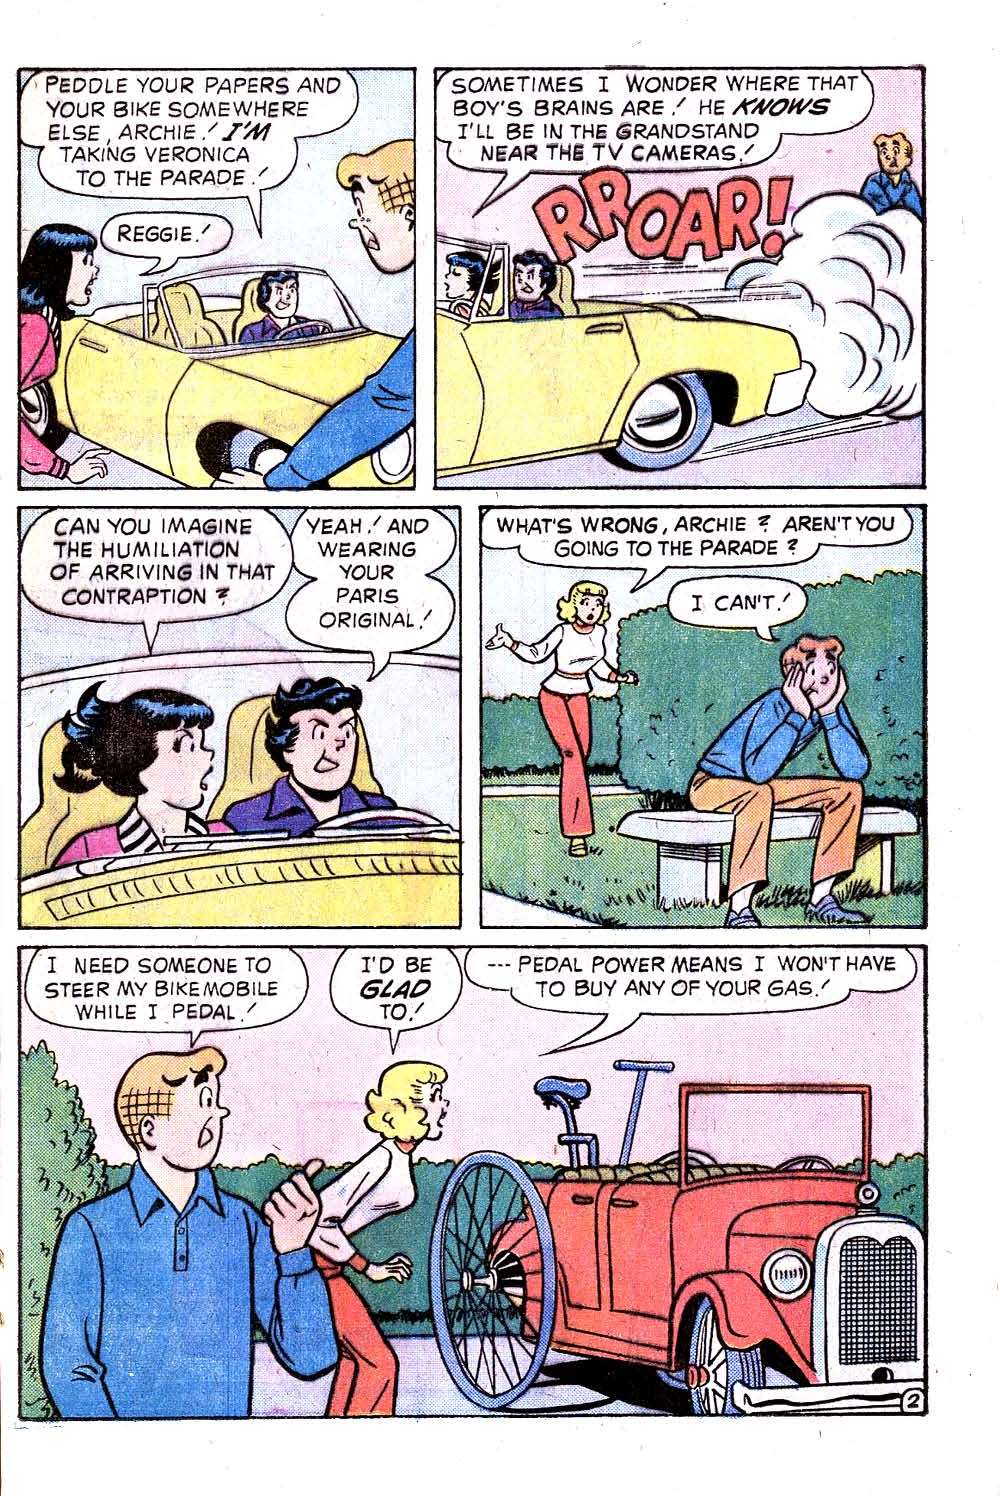 Archie (1960) 244 Page 21